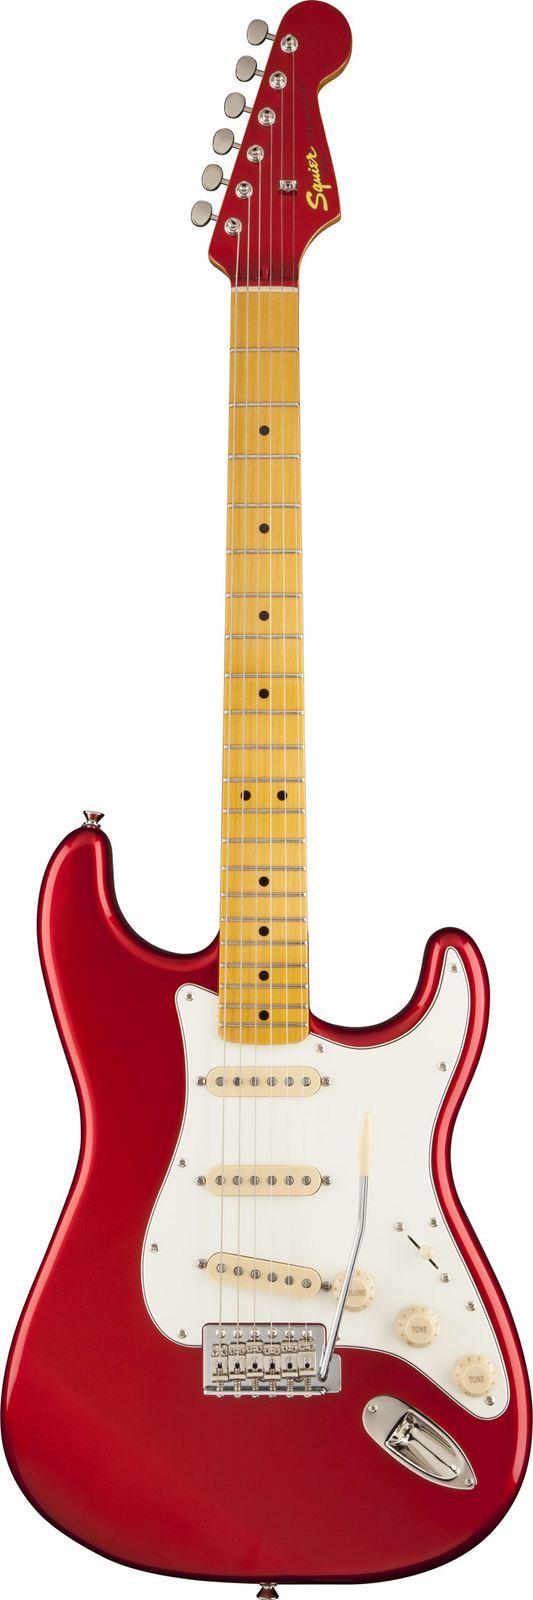 Foto Squier Classic Vibe 50S Stratocaster Maple Fingerboard Candy Apple Red